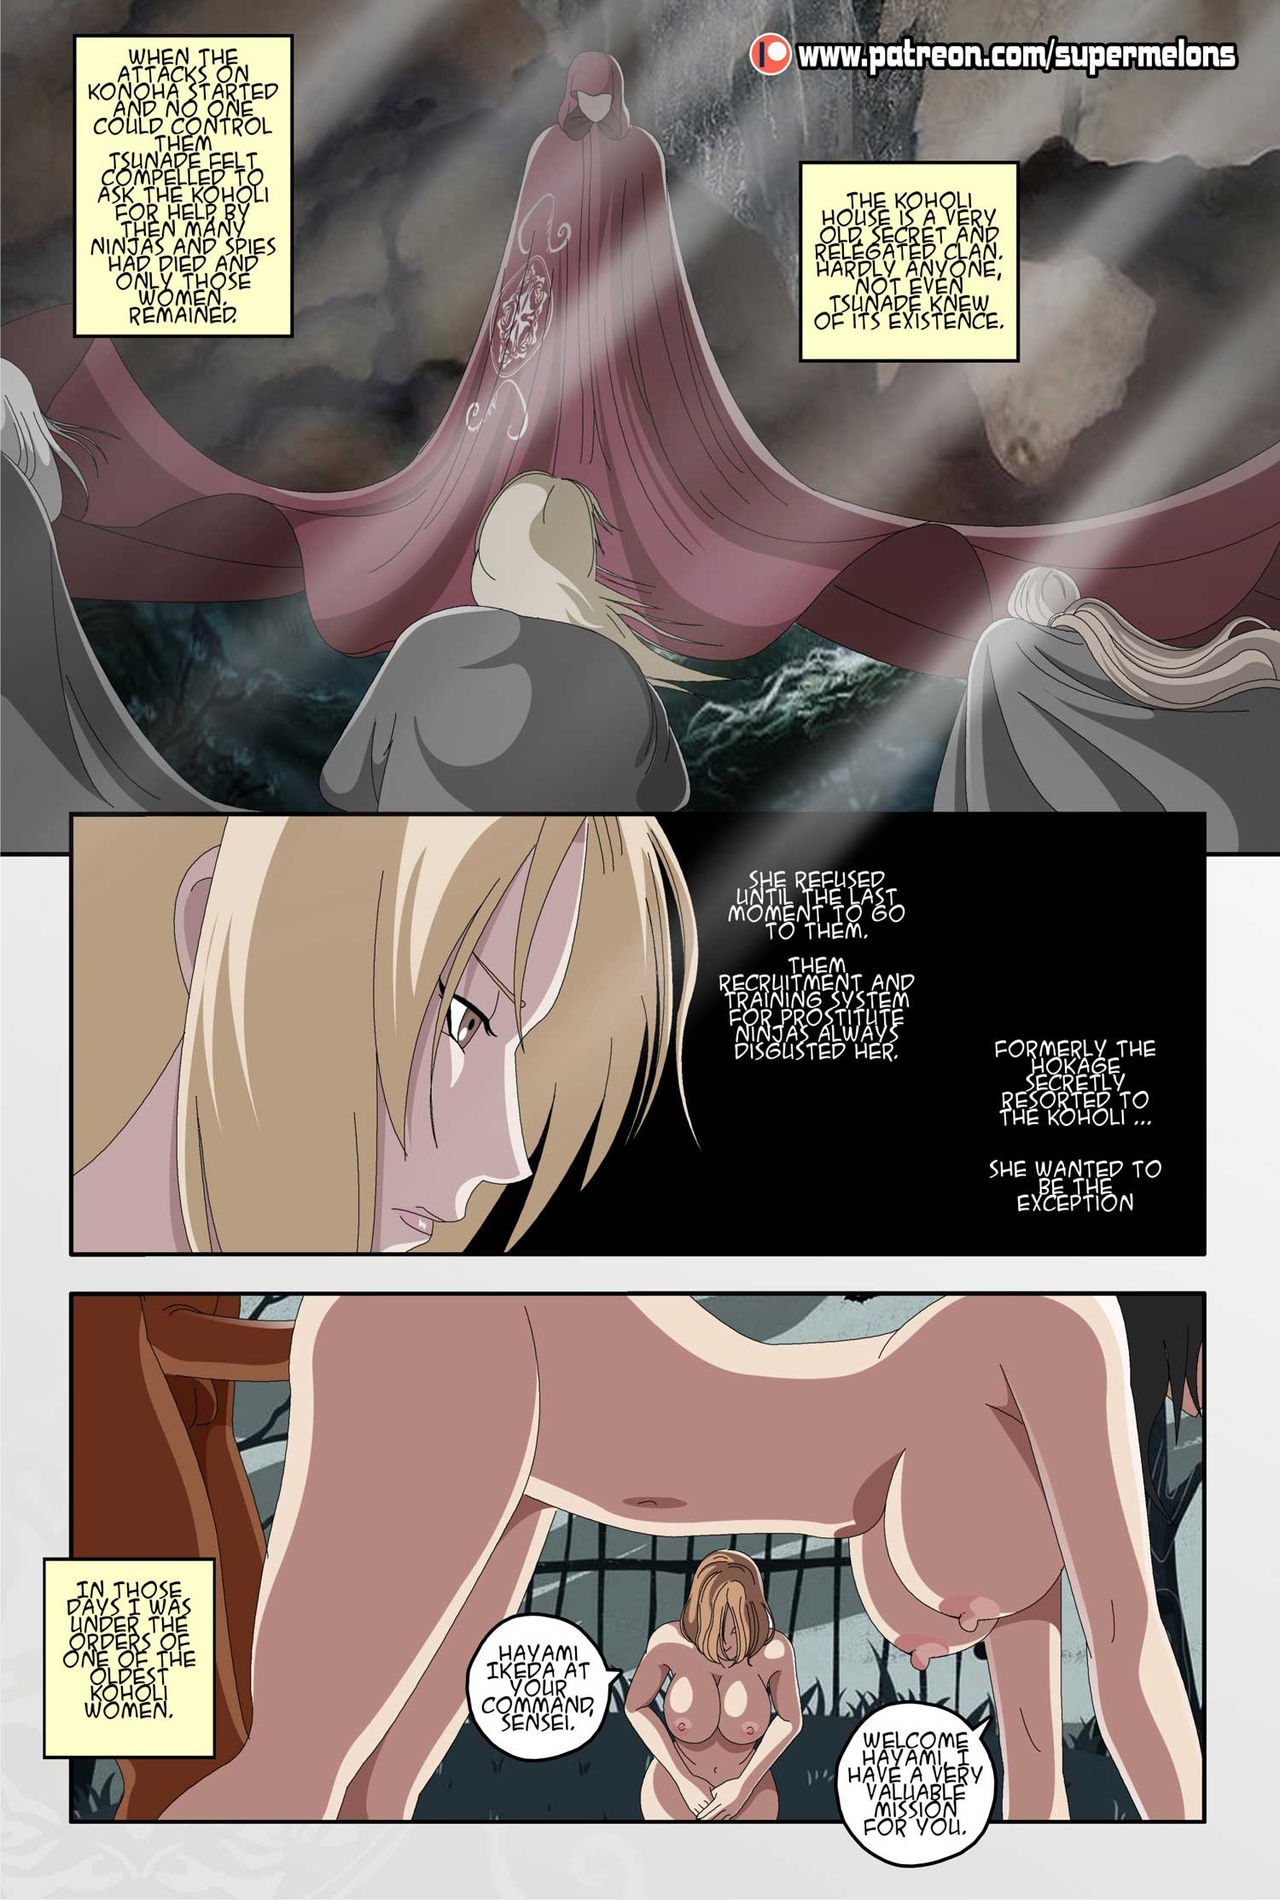 [Super Melons] The Woman with the Scarlet Seal (Naruto) 54